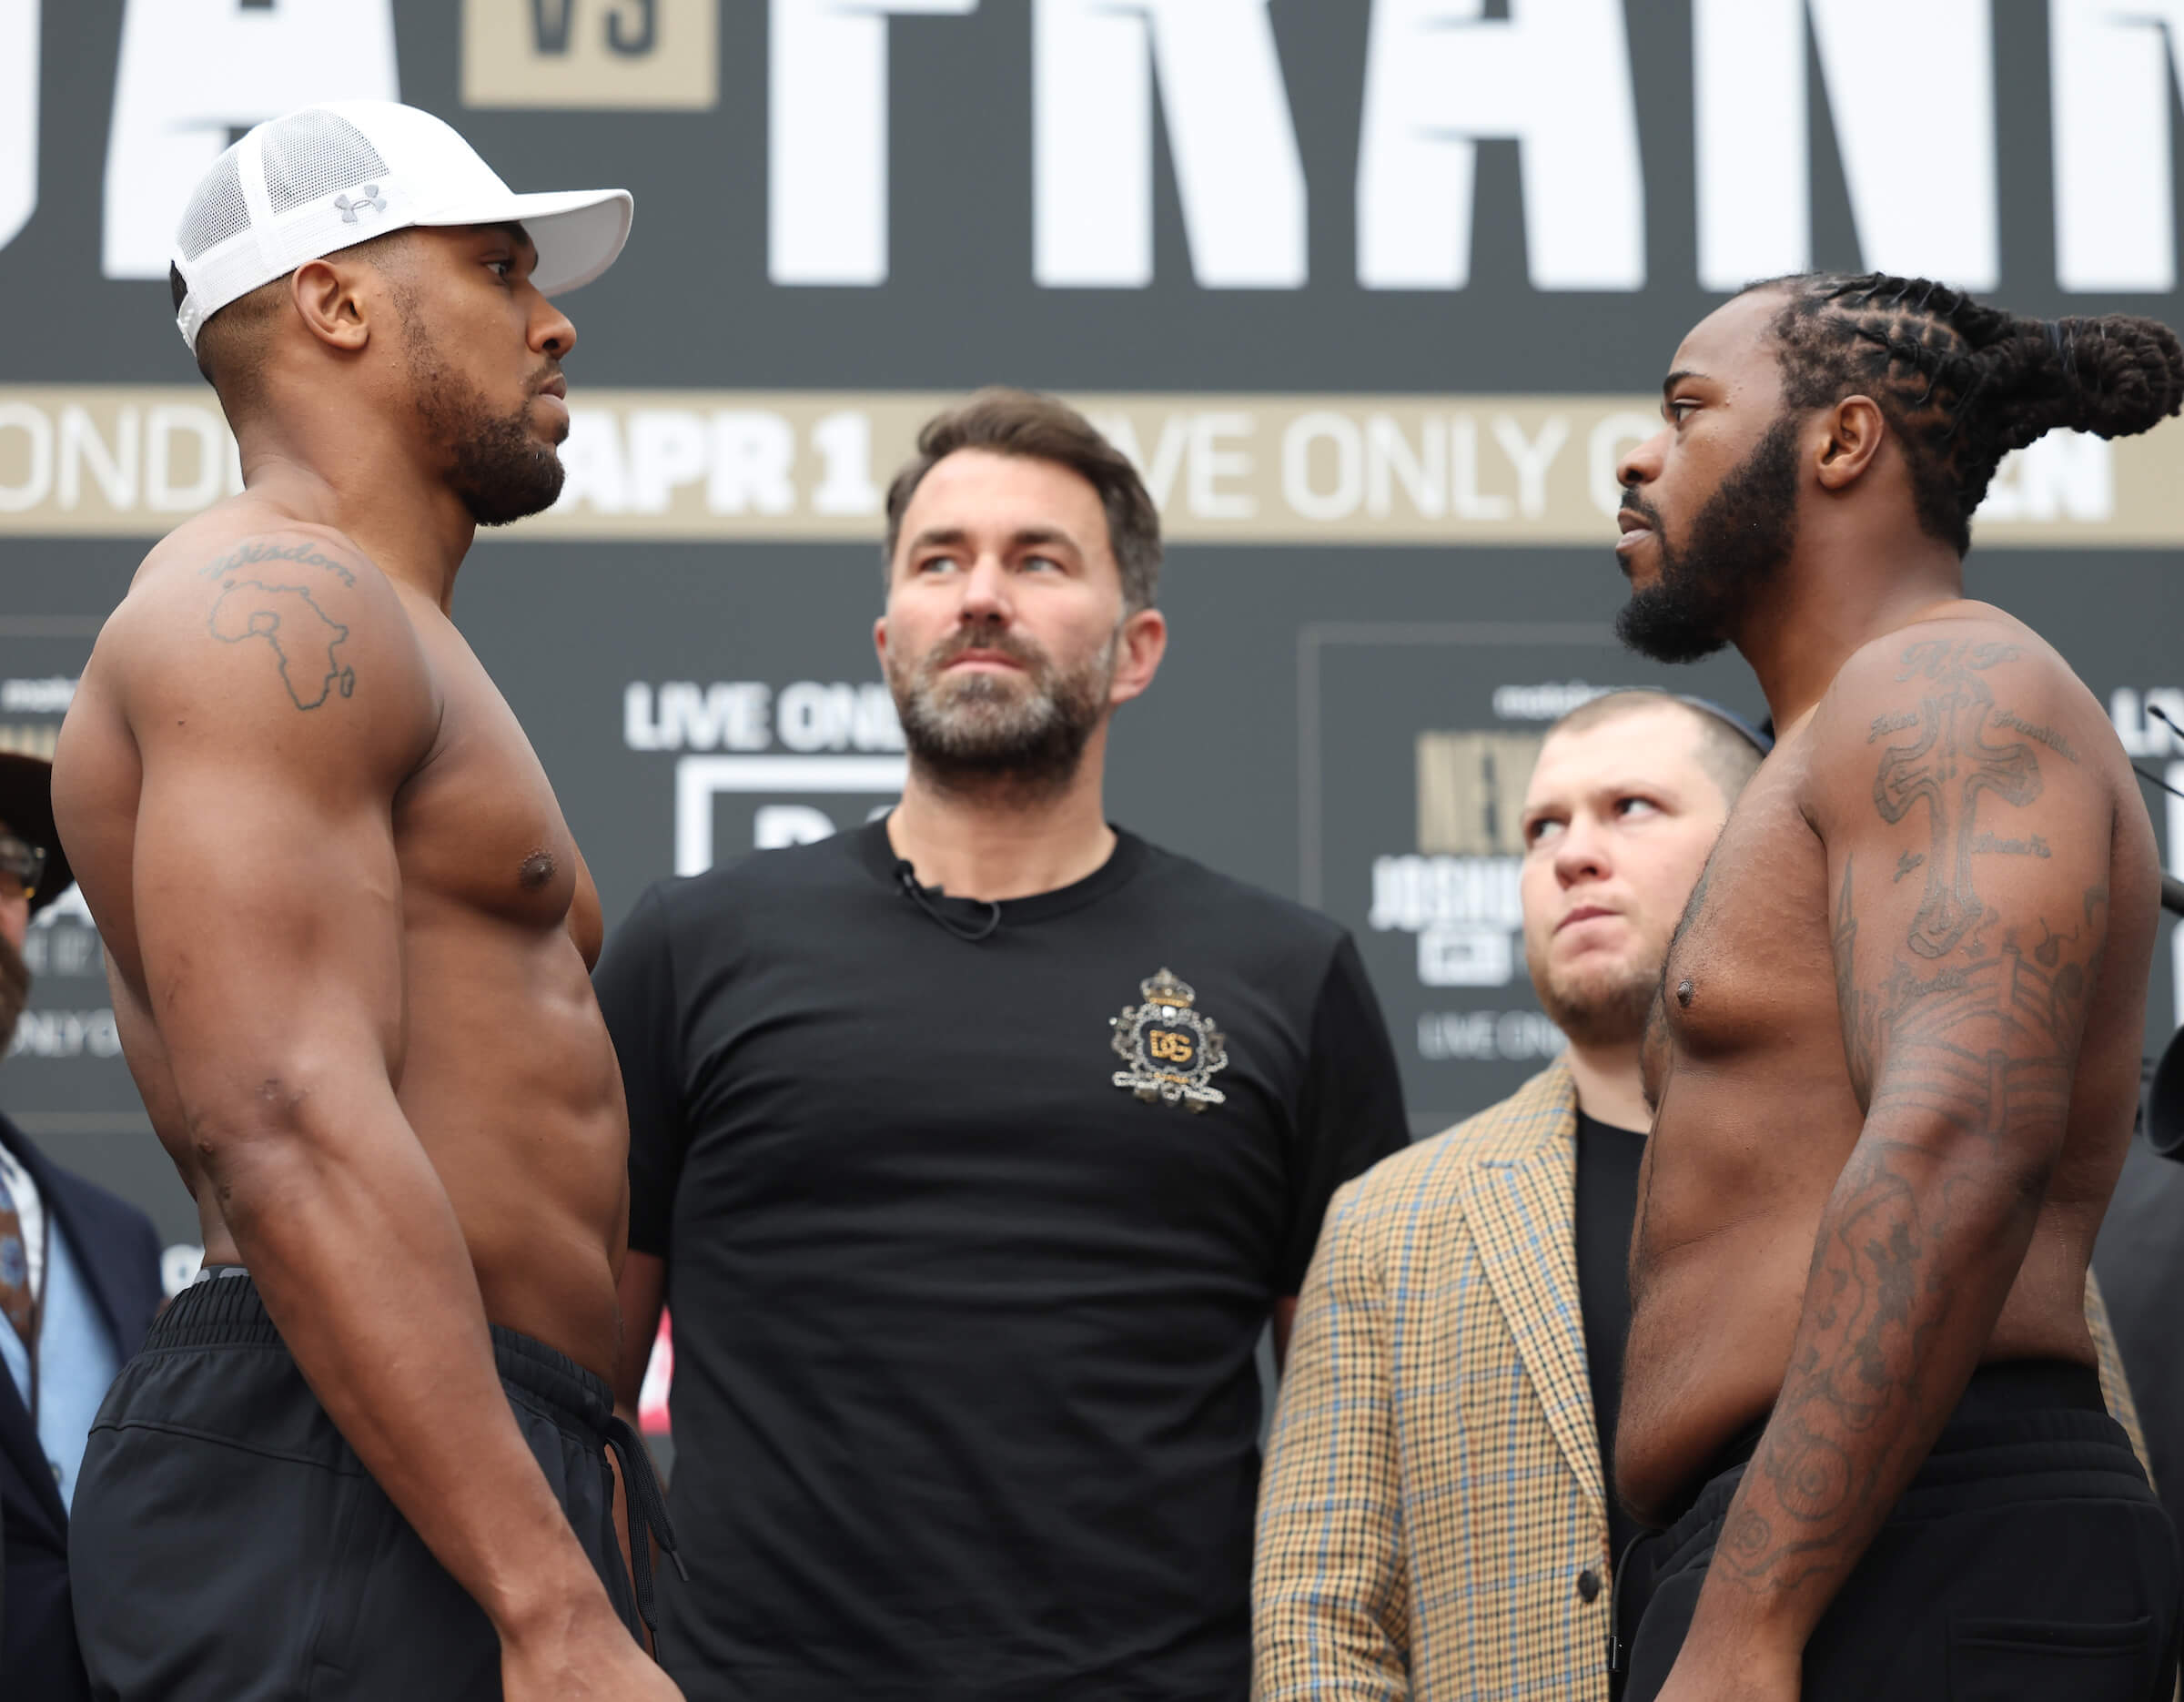 Joshua outweighs Franklin by 21lbs